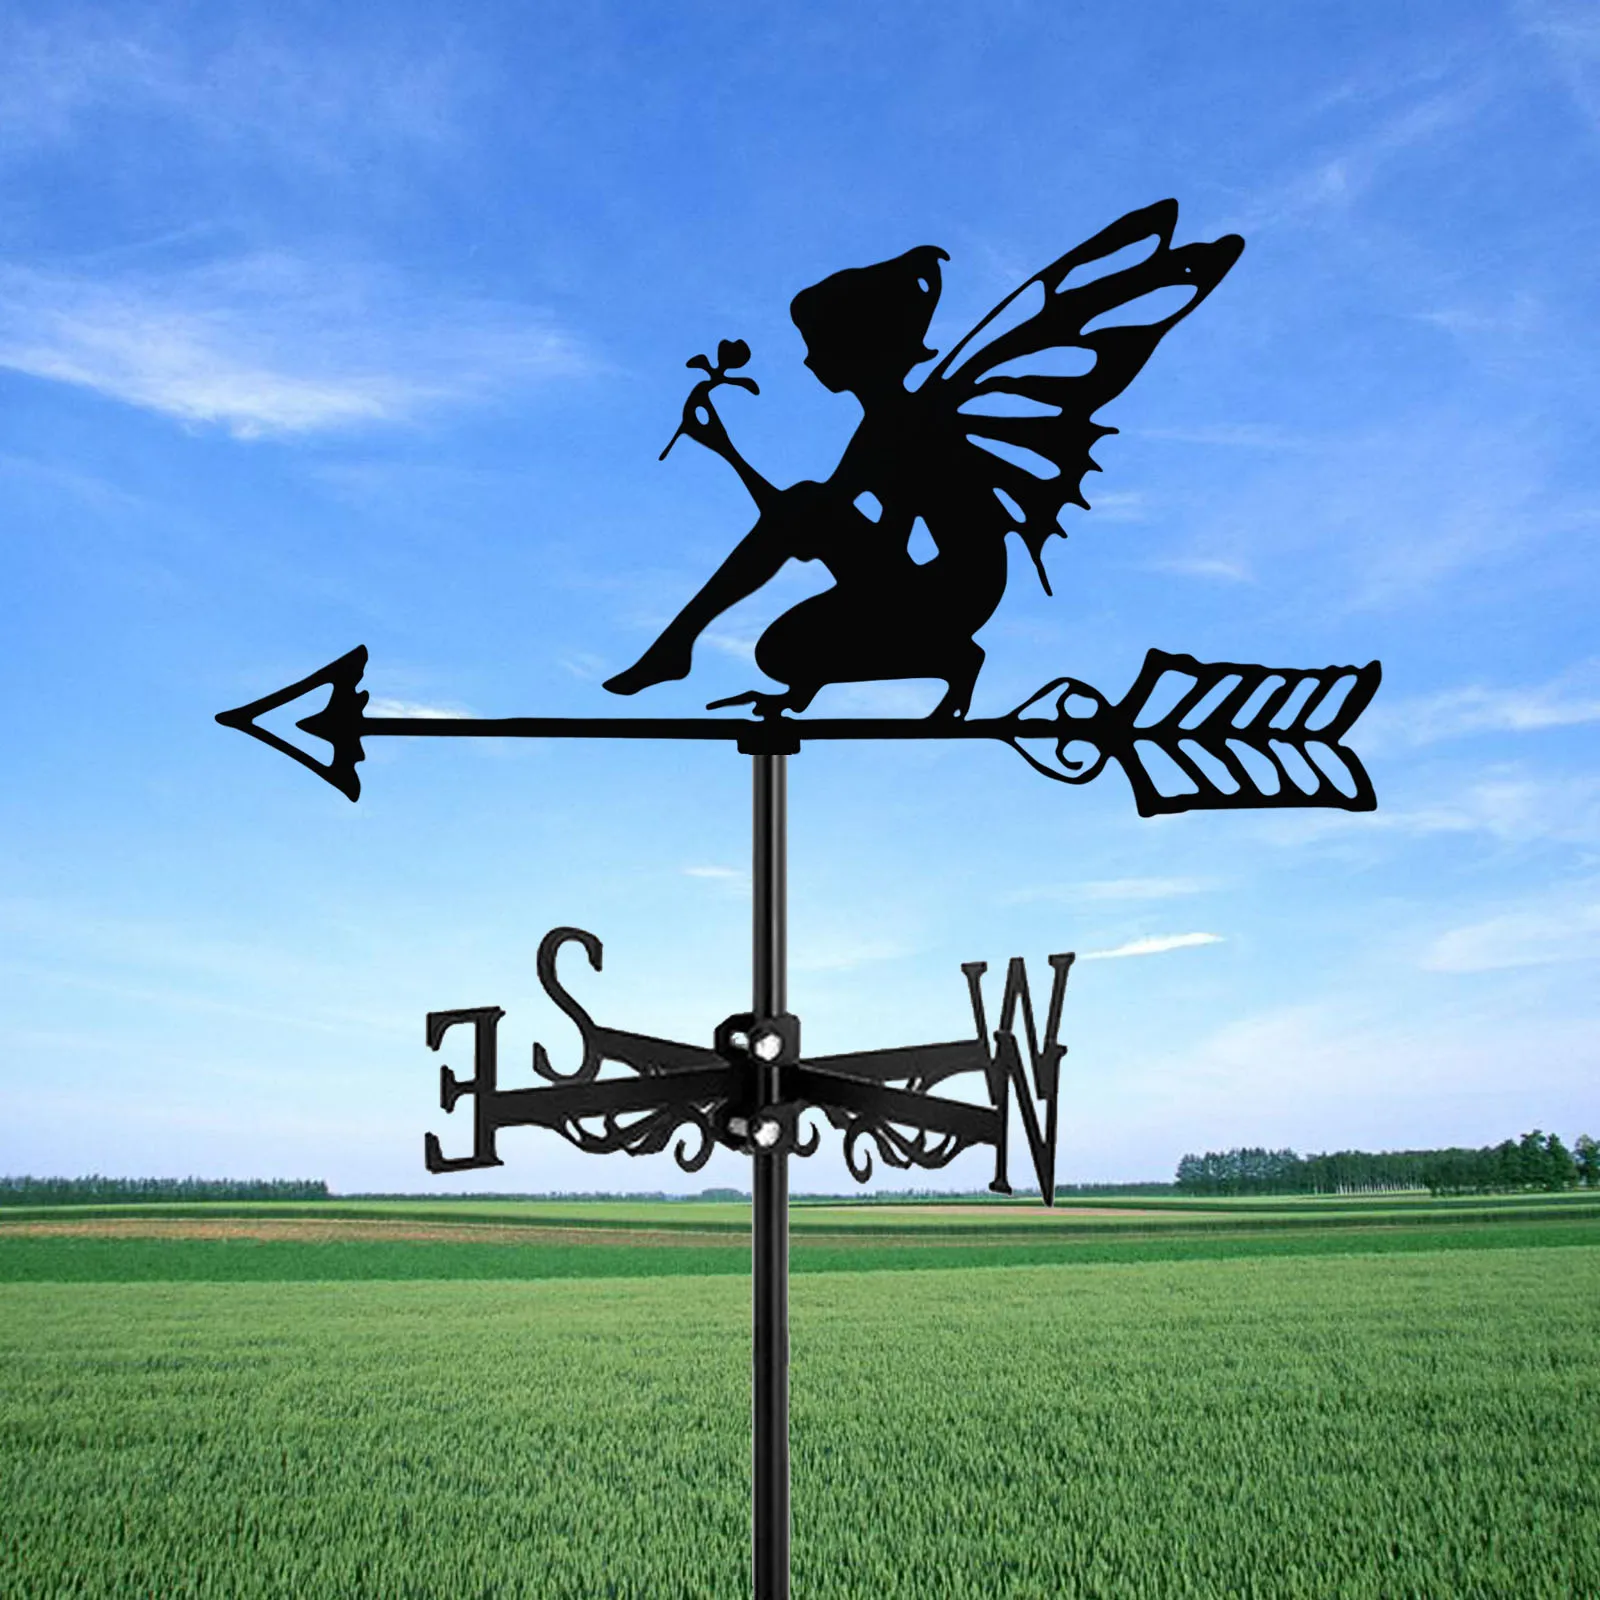 

New Metal Elf Weather Vane Standing Decor Roof Weathervane Flower Fairy Garden Yard Decoration For Shed Home Fence Post